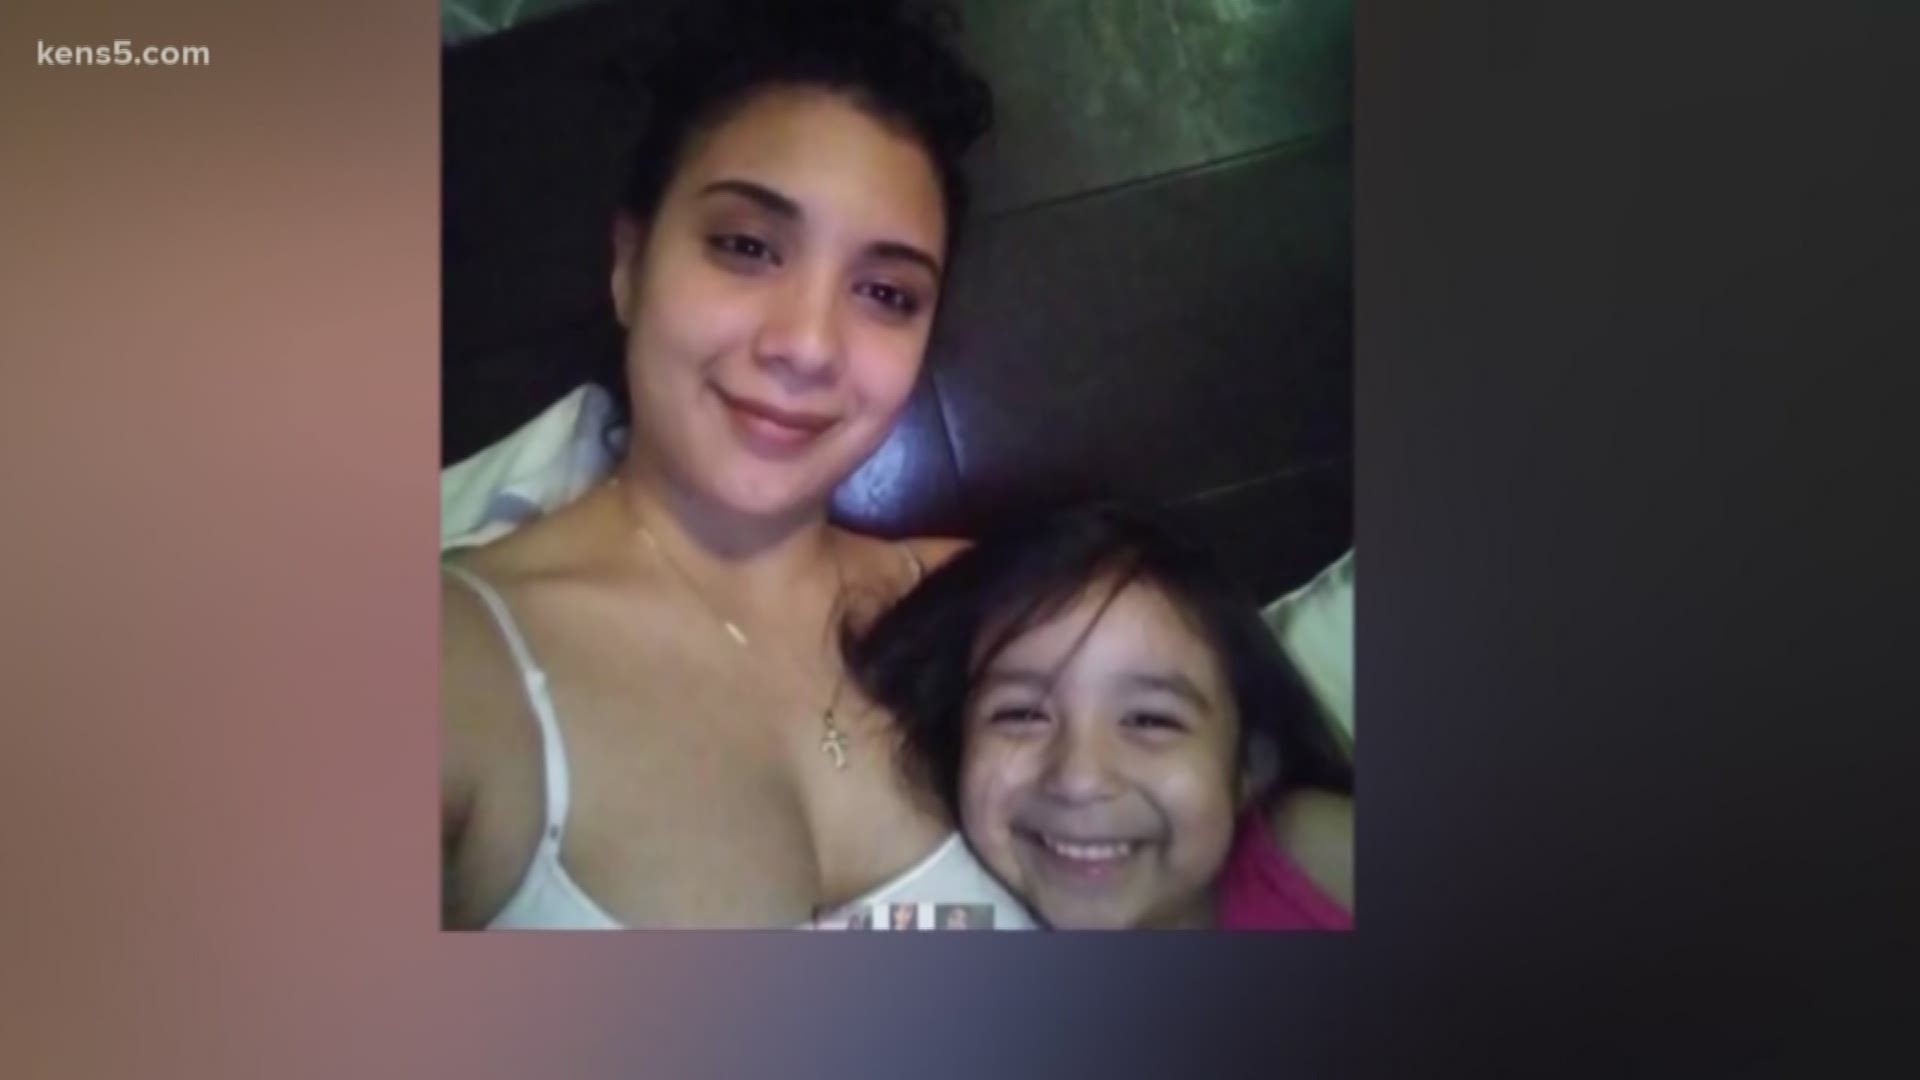 Still no sign of Cecilia Huerta Gallegos since she vanished in July. An arrest affidavit points strongly toward her husband as the reason she disappeared.